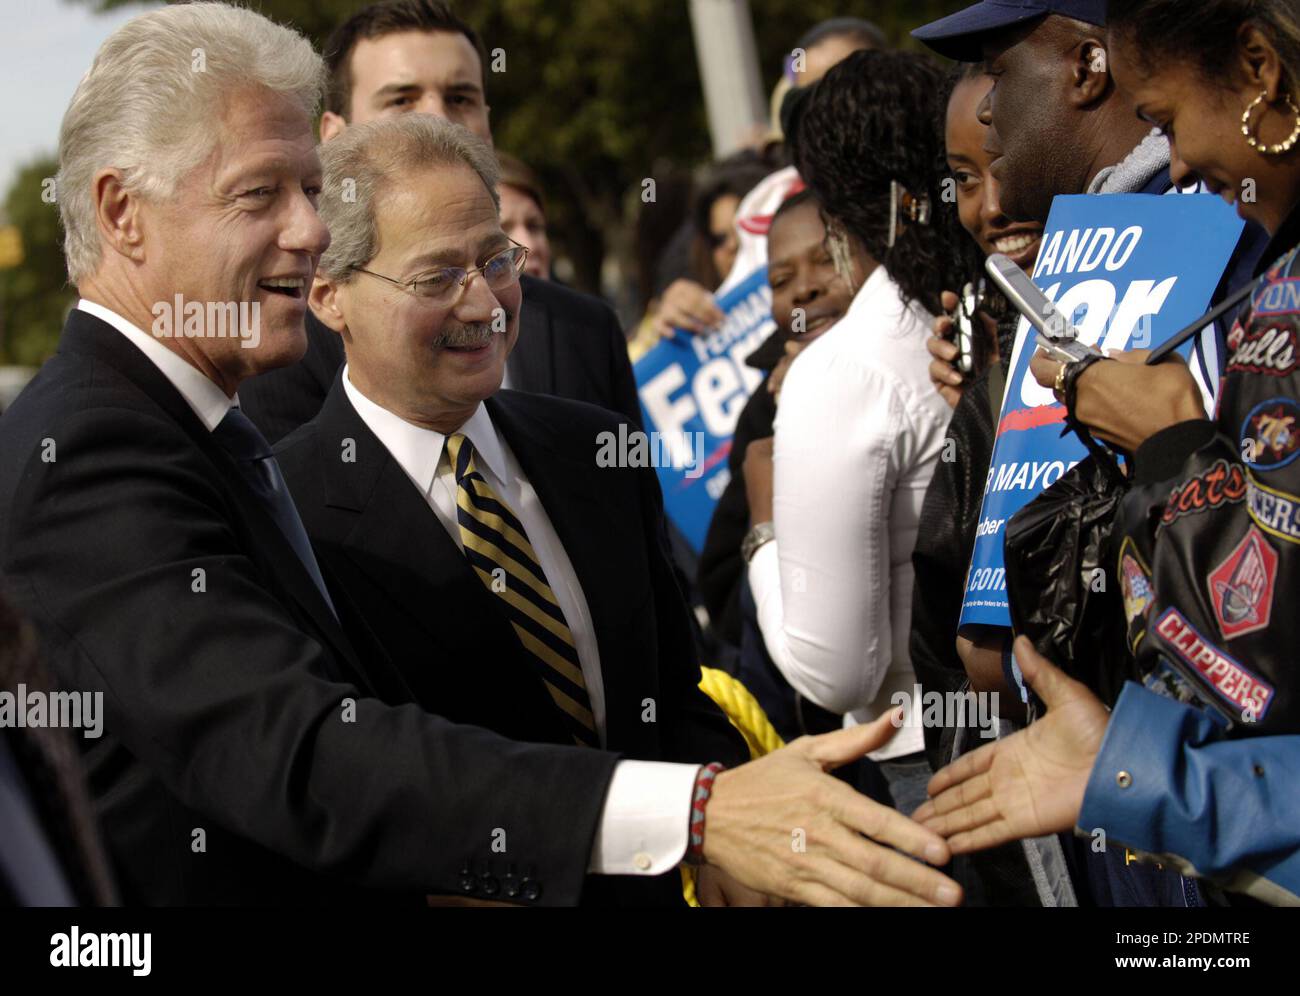 Supporters of mayoral candidate Fernando Ferrer, second left, clamour for a  chance to greet Ferrer and former President Bill Clinton as they campaign  together in the Bronx borough of New York Thursday